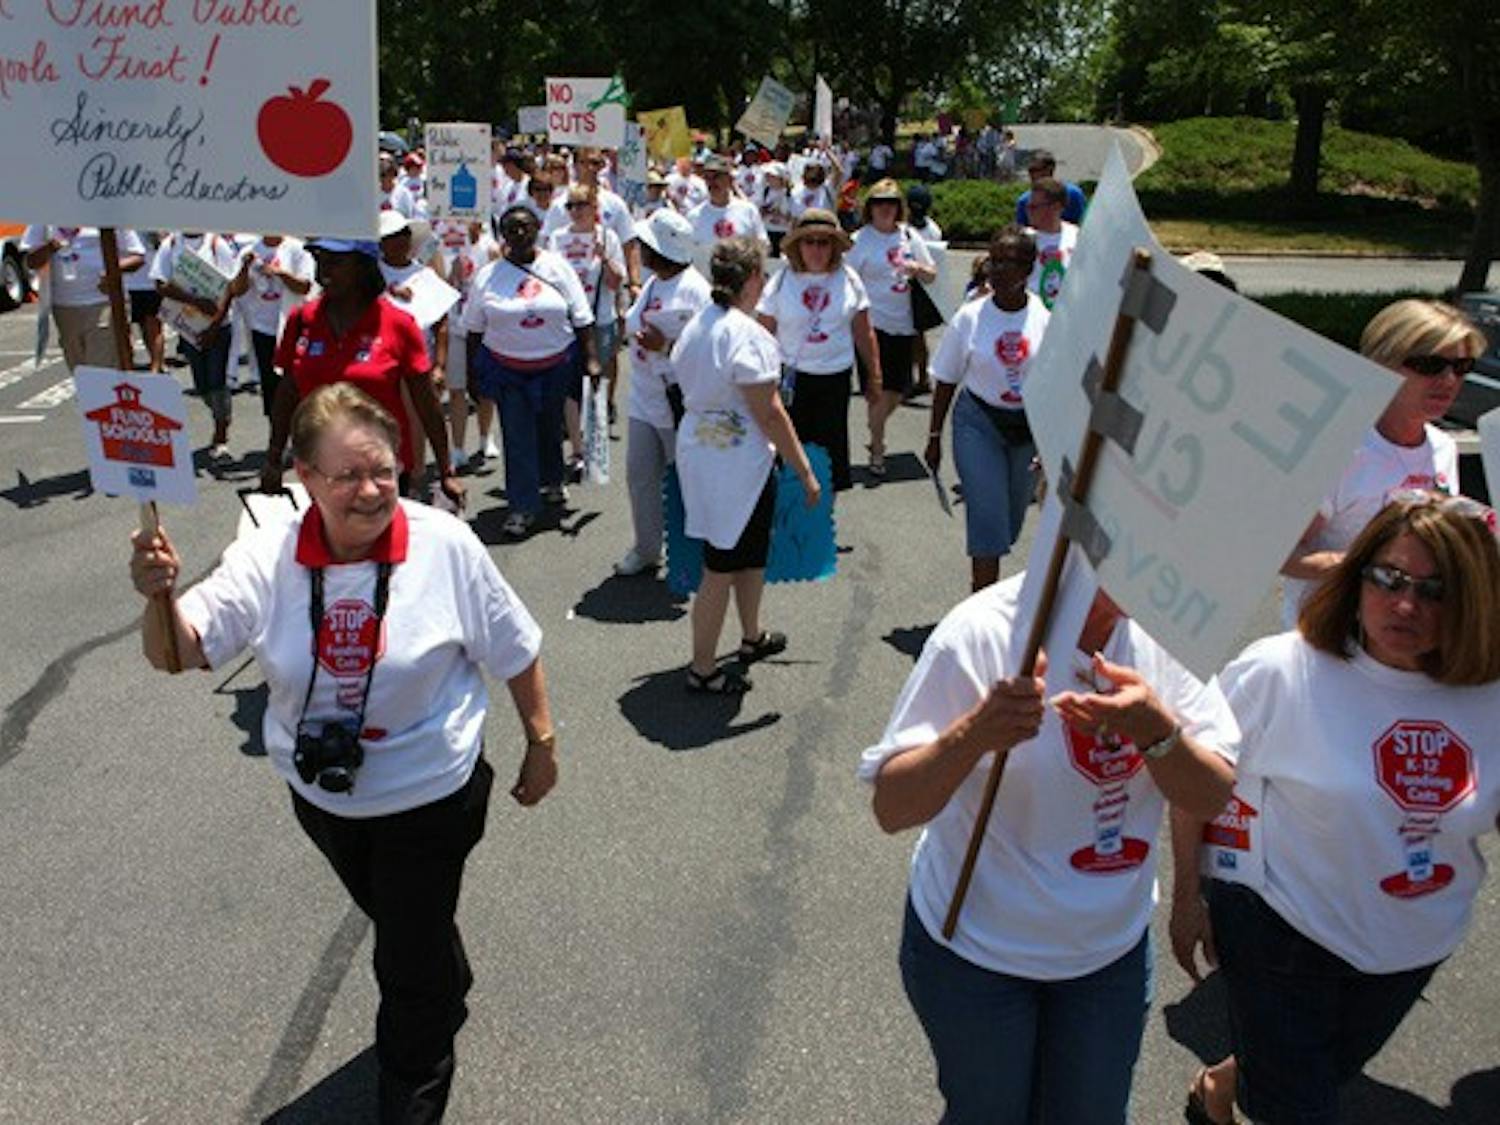 English teacher Diane Leazer marches with a crowd of supporters for K-12 public education funding. DTH/Stephen Mitchell